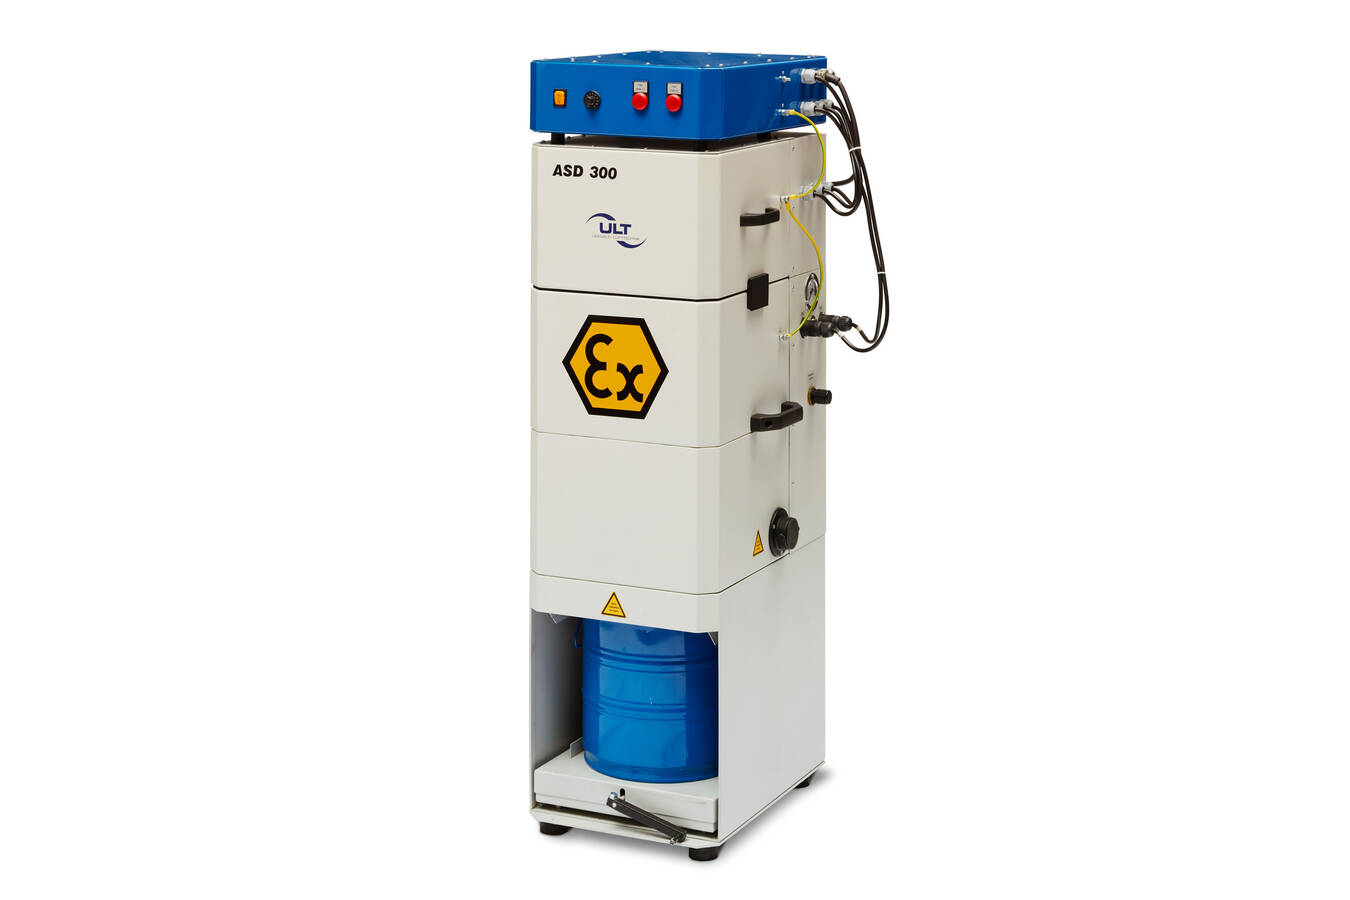 Cost-optimised extraction and filtration of combustible dusts  ULT’s extraction and filtration system, the ASD 300 Ex was developed for the efficient removal of explosive dusts. 